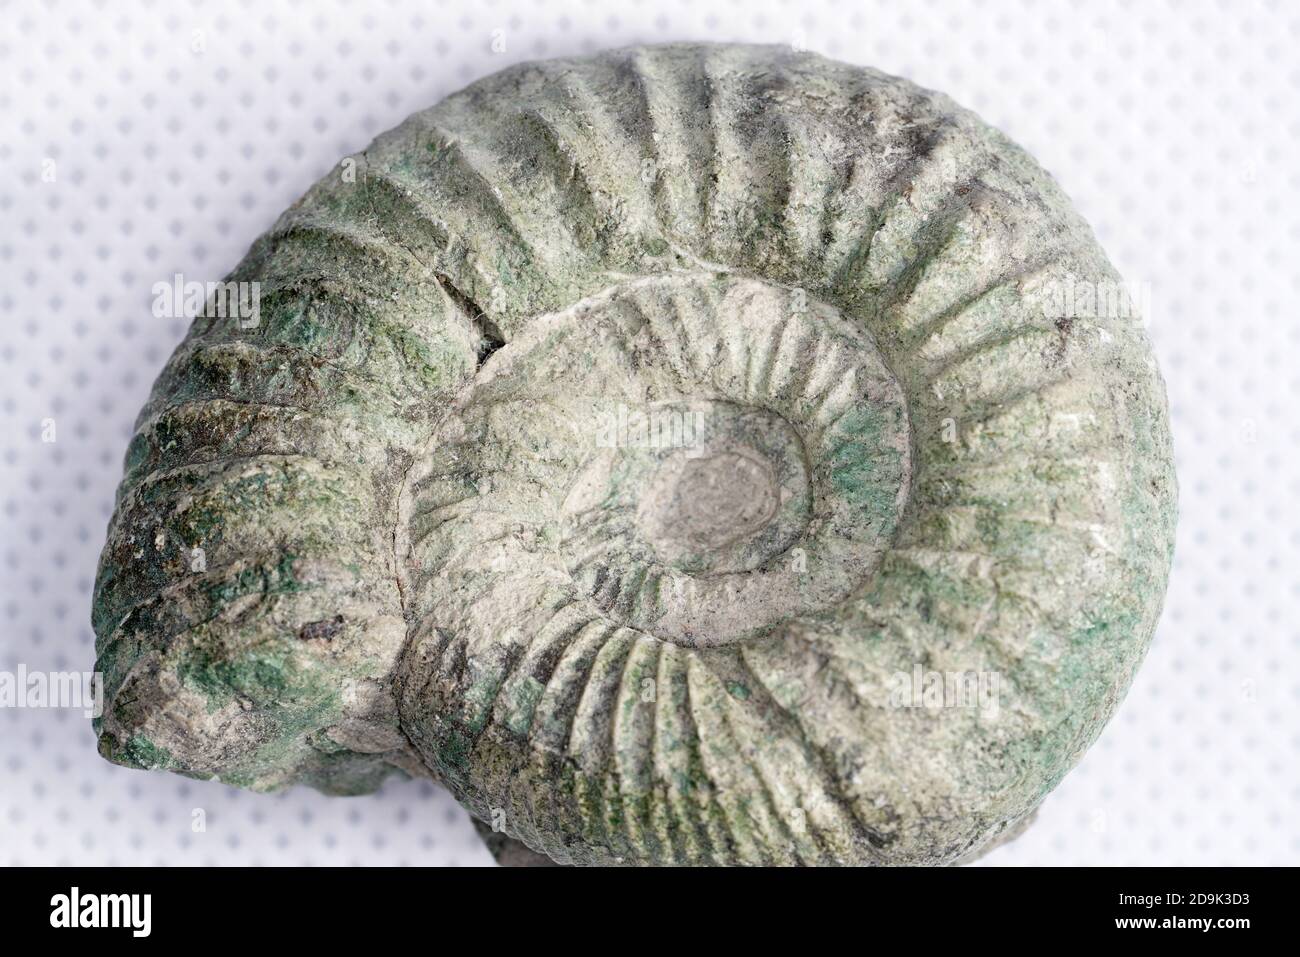 Closeup of an ammonite carapace on a white surface Stock Photo